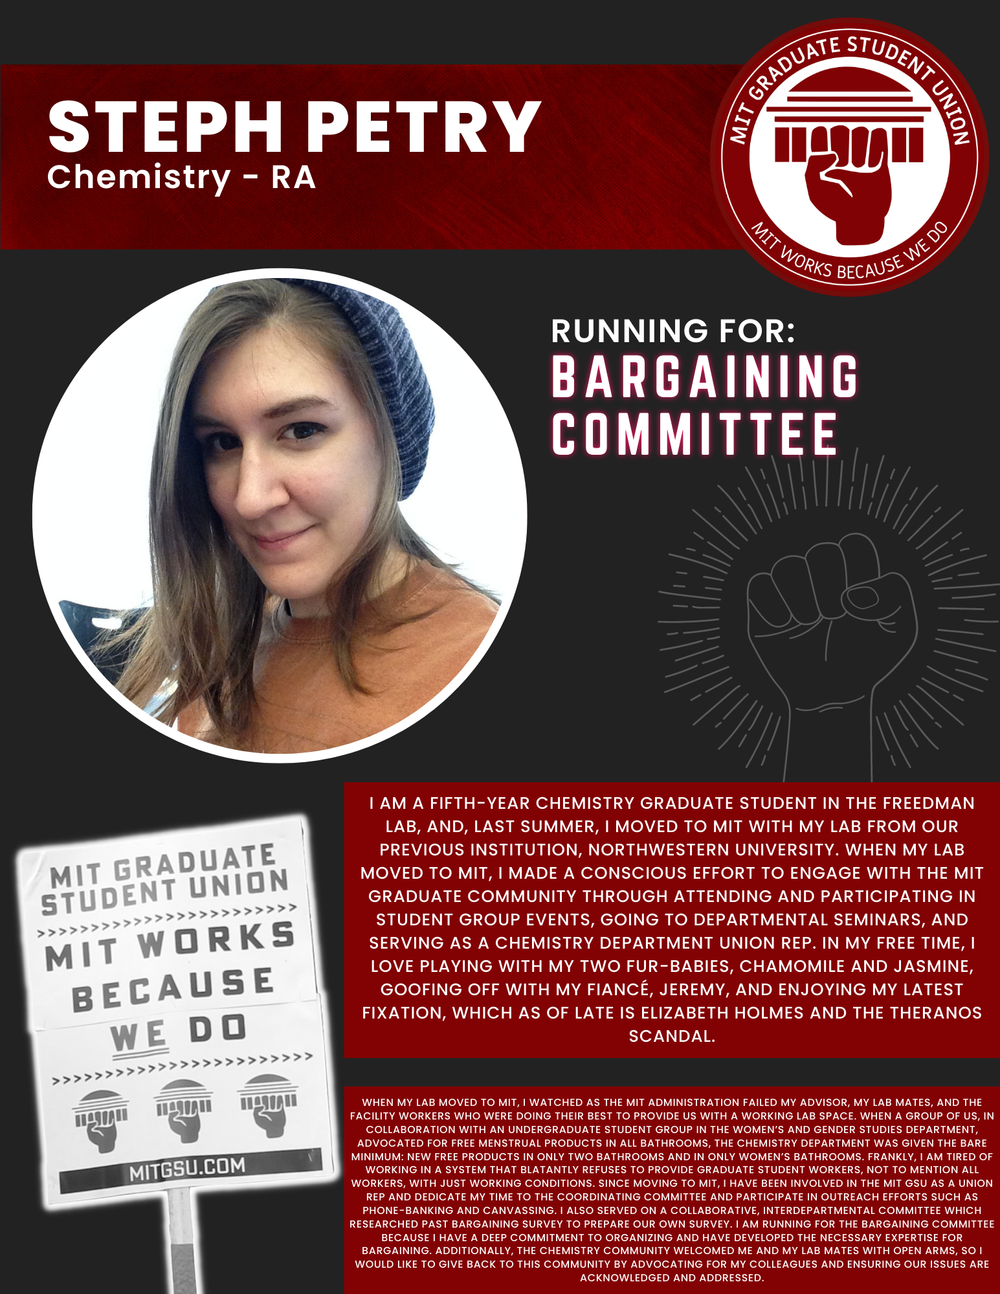  STEPH PETRY Chemistry - RA   RUNNING FOR: Bargaining Committee  I AM A FIFTH-YEAR CHEMISTRY GRADUATE STUDENT IN THE FREEDMAN LAB, AND, LAST SUMMER, I MOVED TO MIT WITH MY LAB FROM OUR PREVIOUS INSTITUTION, NORTHWESTERN UNIVERSITY. WHEN MY LAB MOVED 